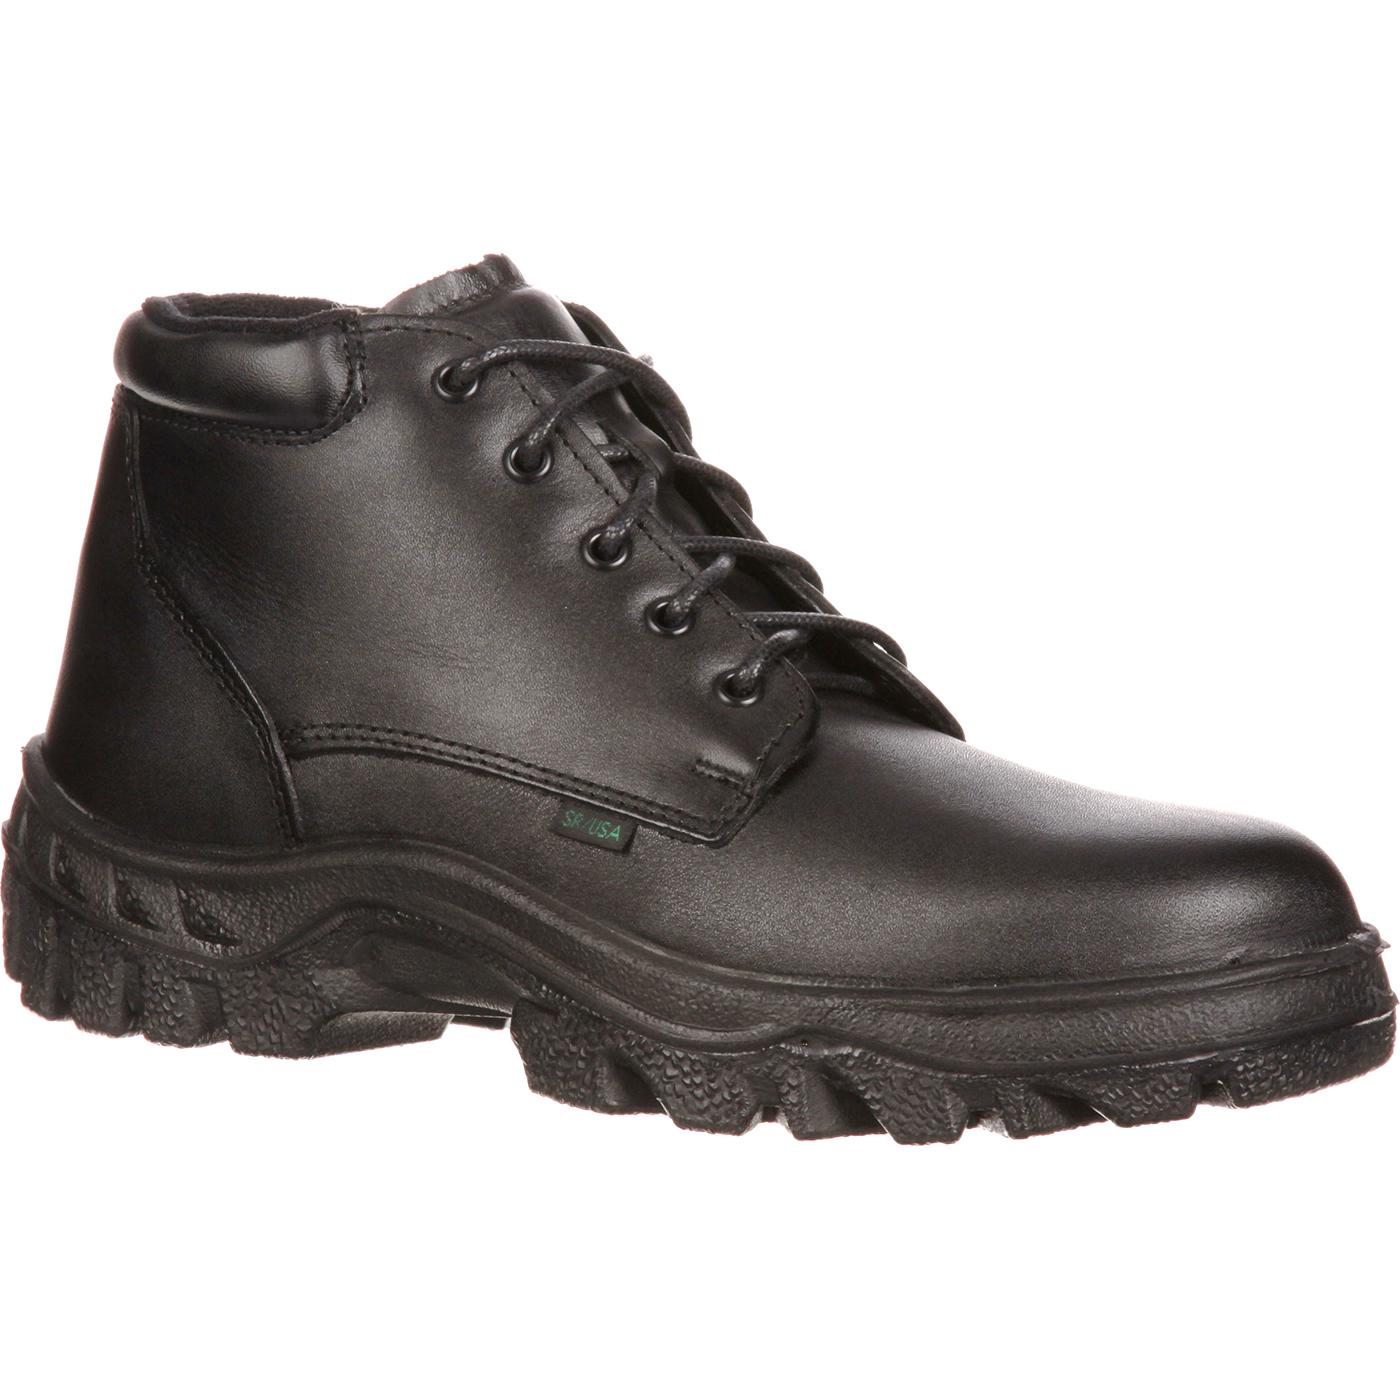 Rocky Mens Tmc Duty Pt Chk Casual Boots Boots - - image 1 of 7